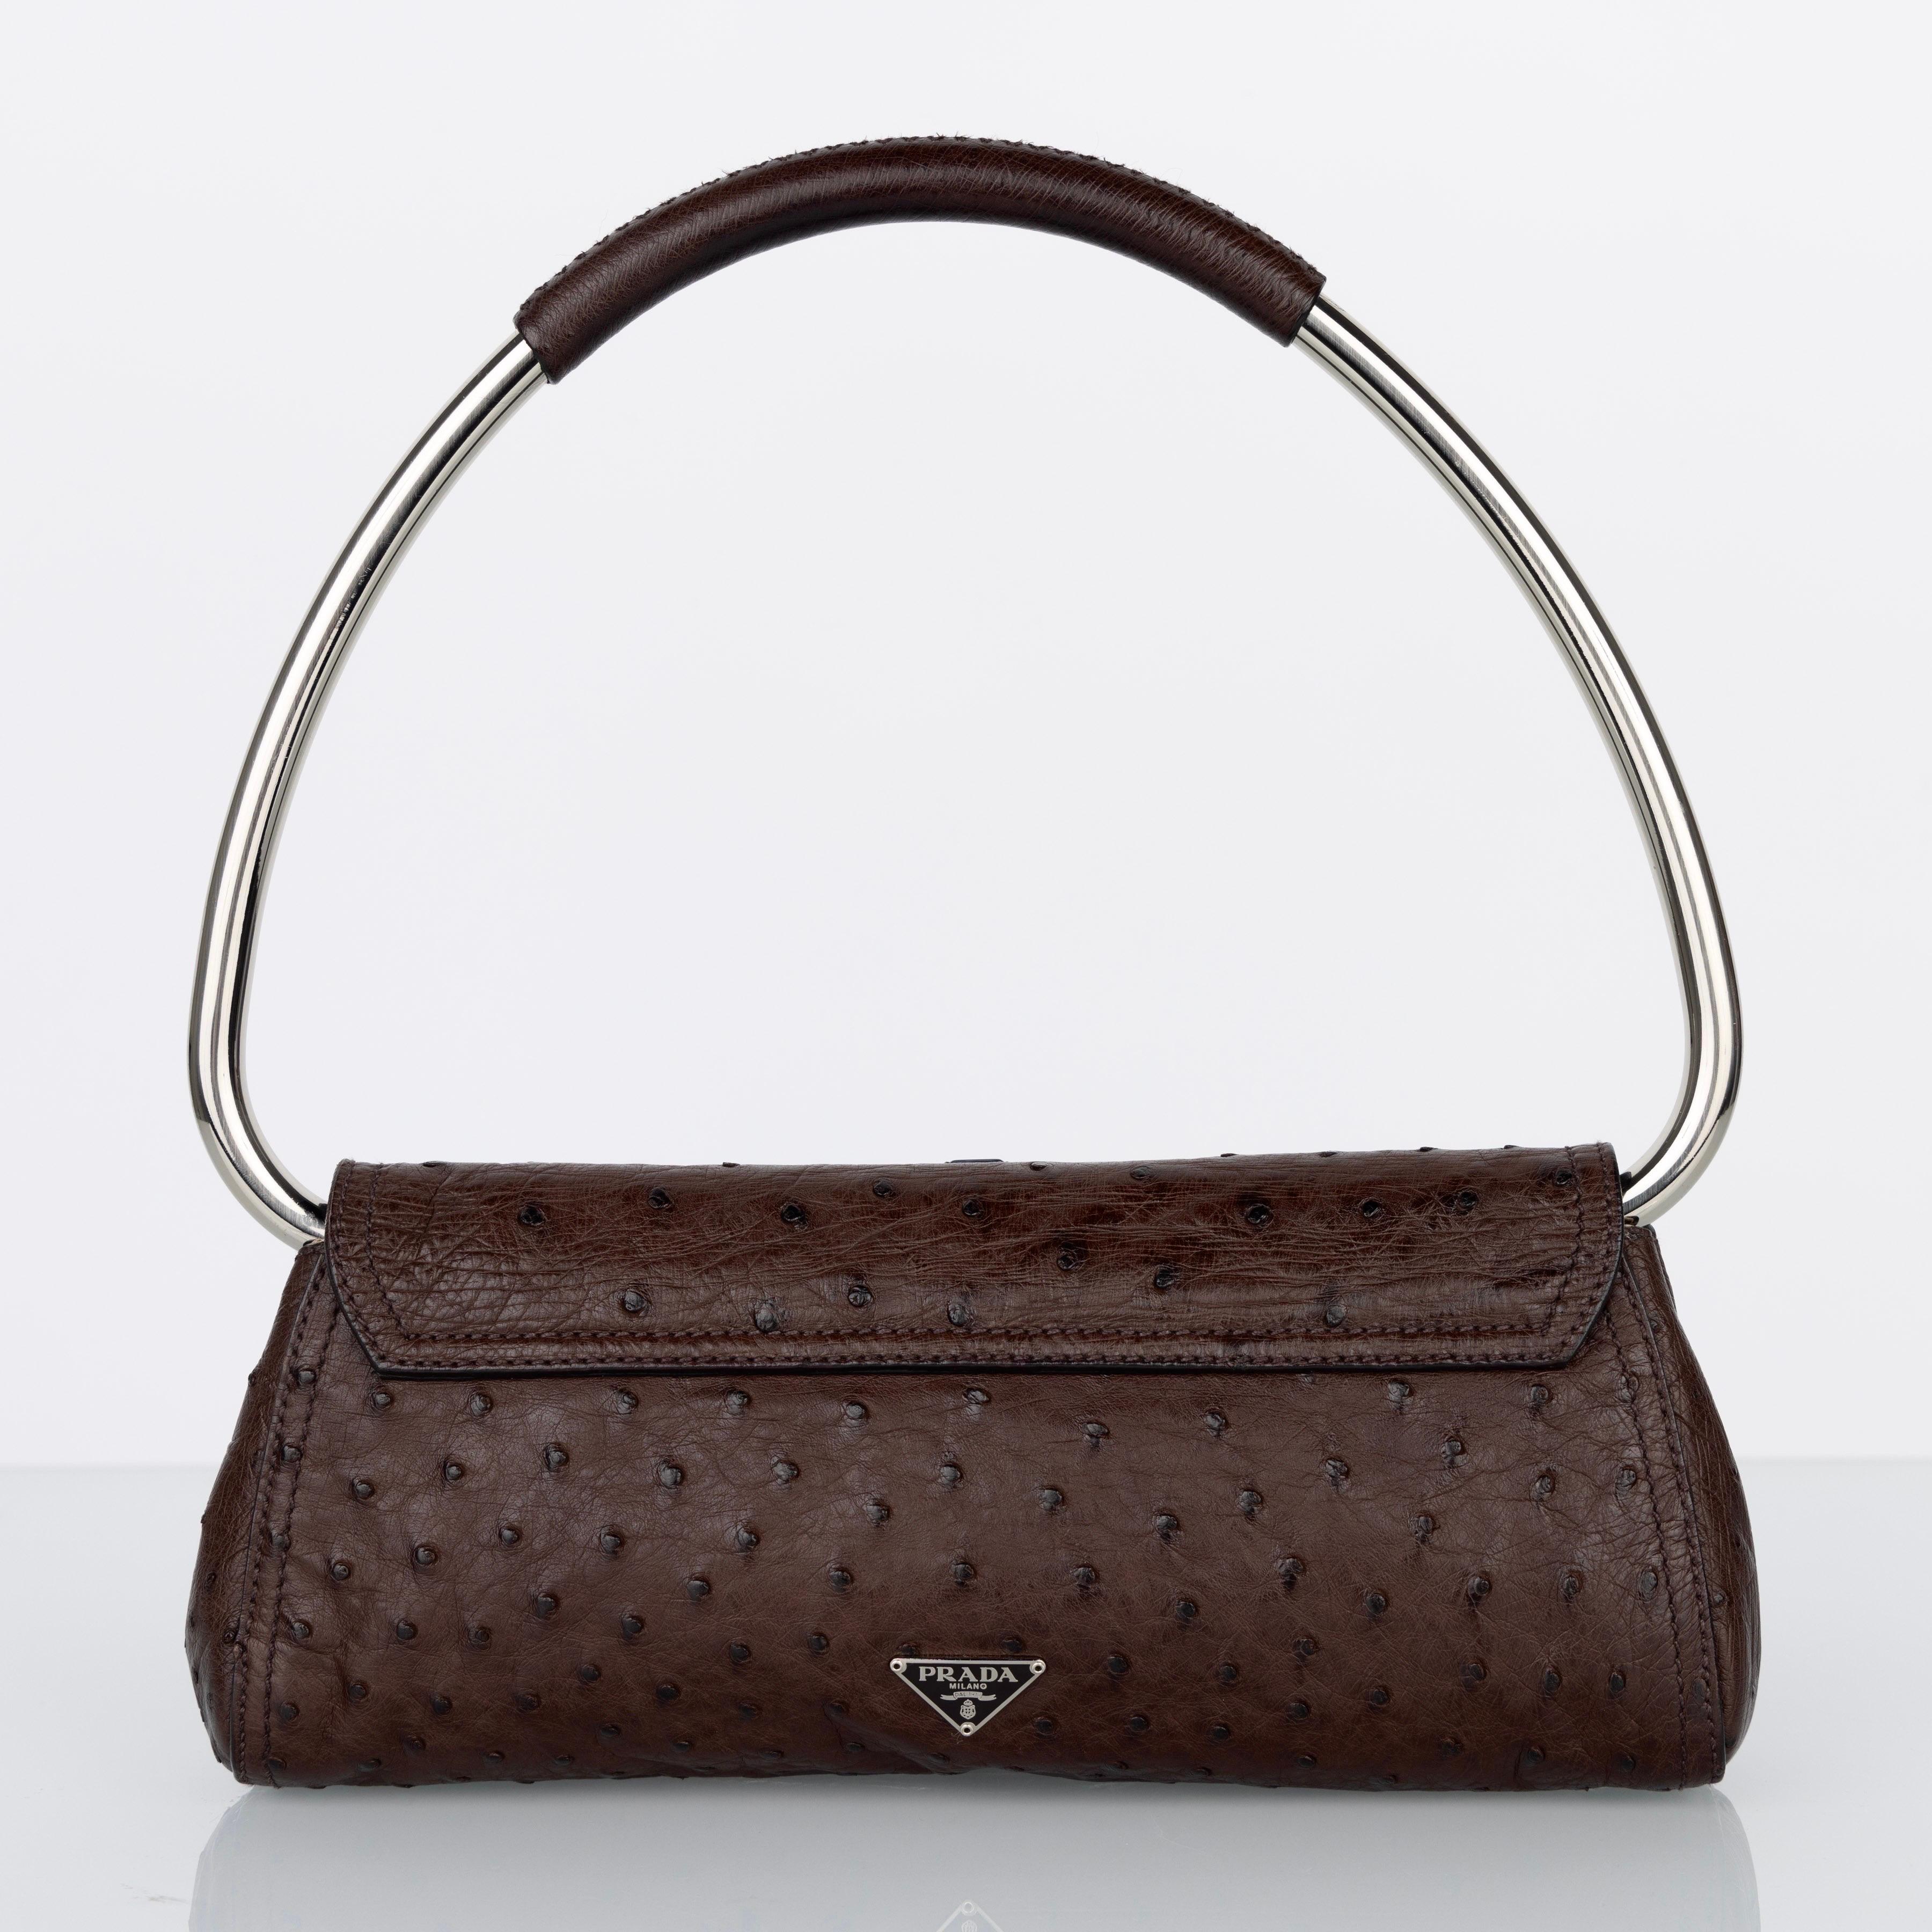 Prada Brown Ostrich Leather Jewel Embellished Swing Bag SS 2003 Archival Piece For Sale 2